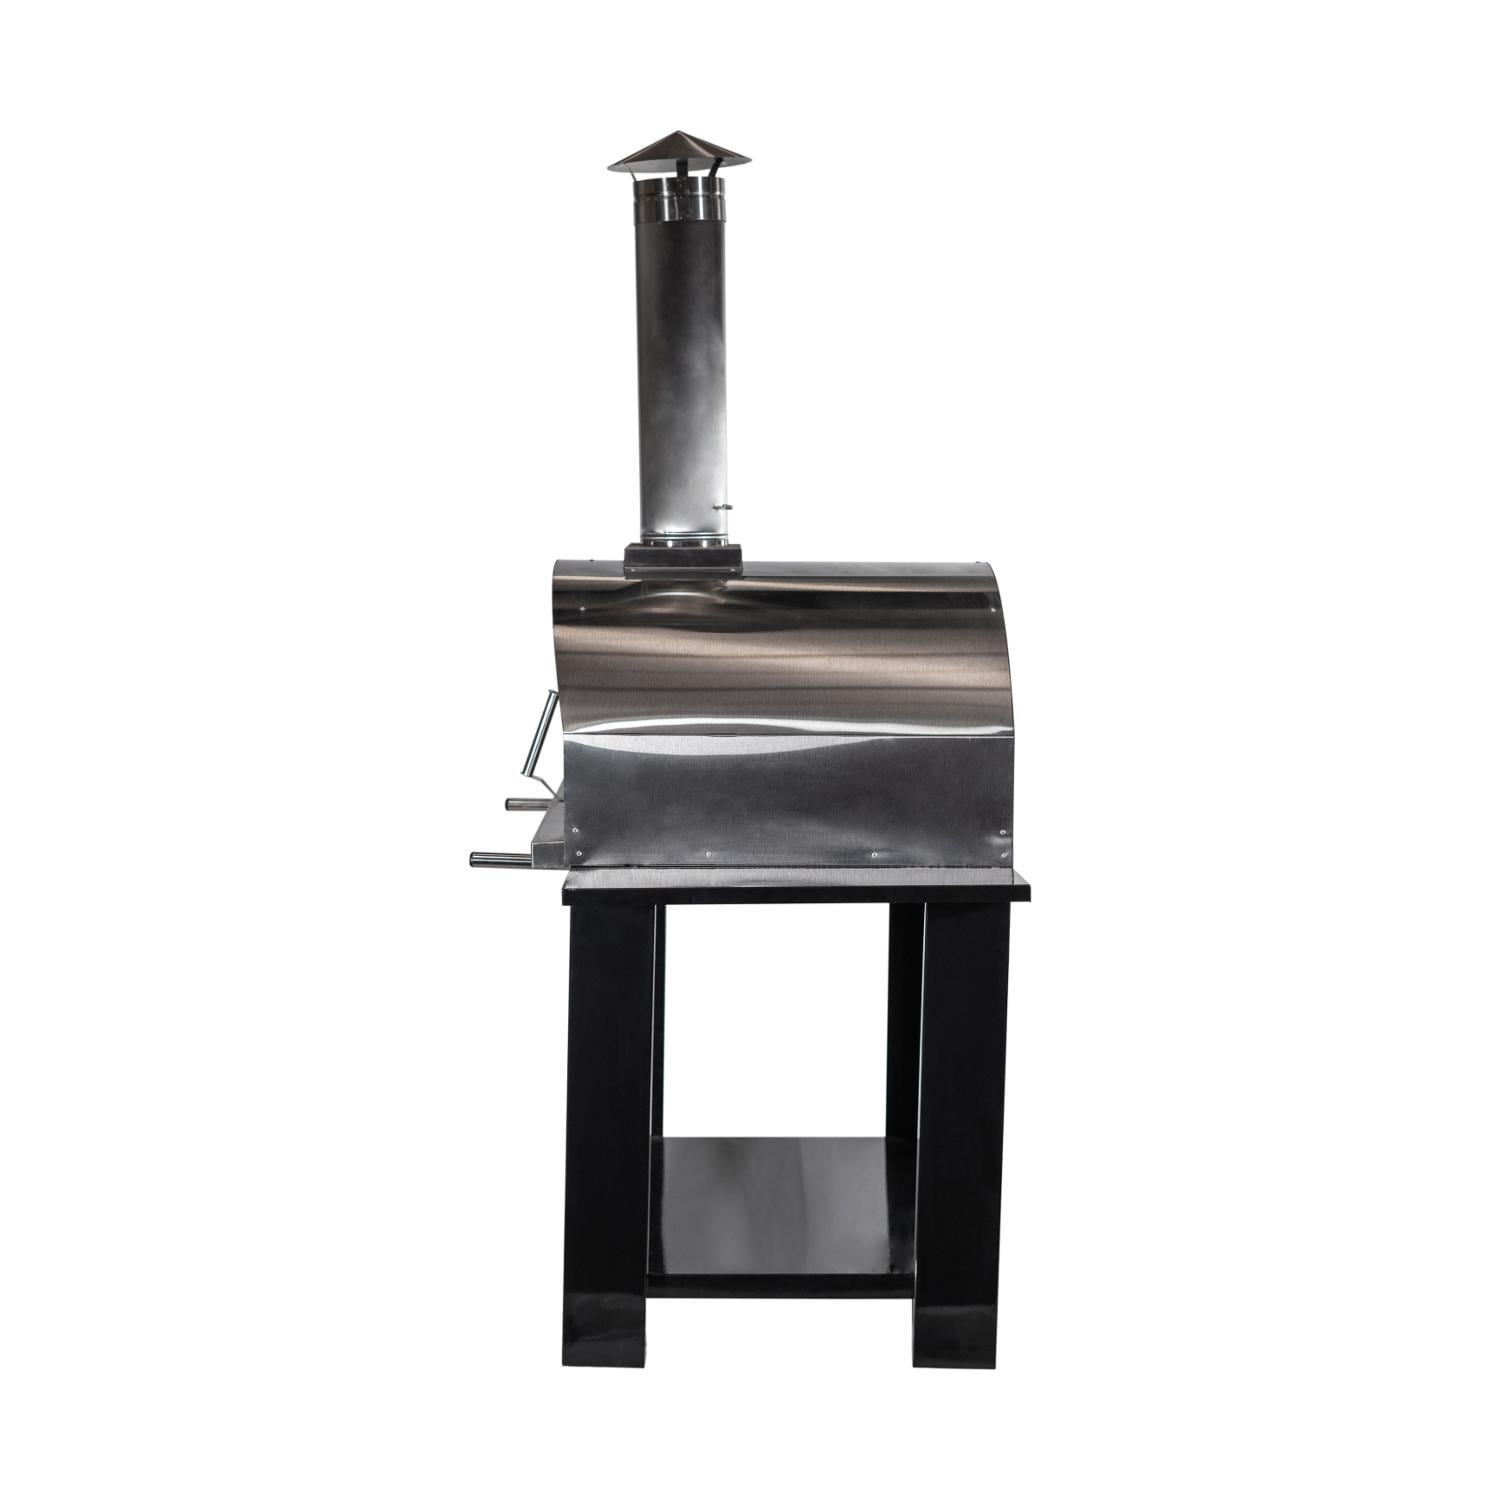 Nuke 31 Inch Outdoor Wood Fired Stainless Steel Freestanding Pizza Cooking Oven - image 3 of 6